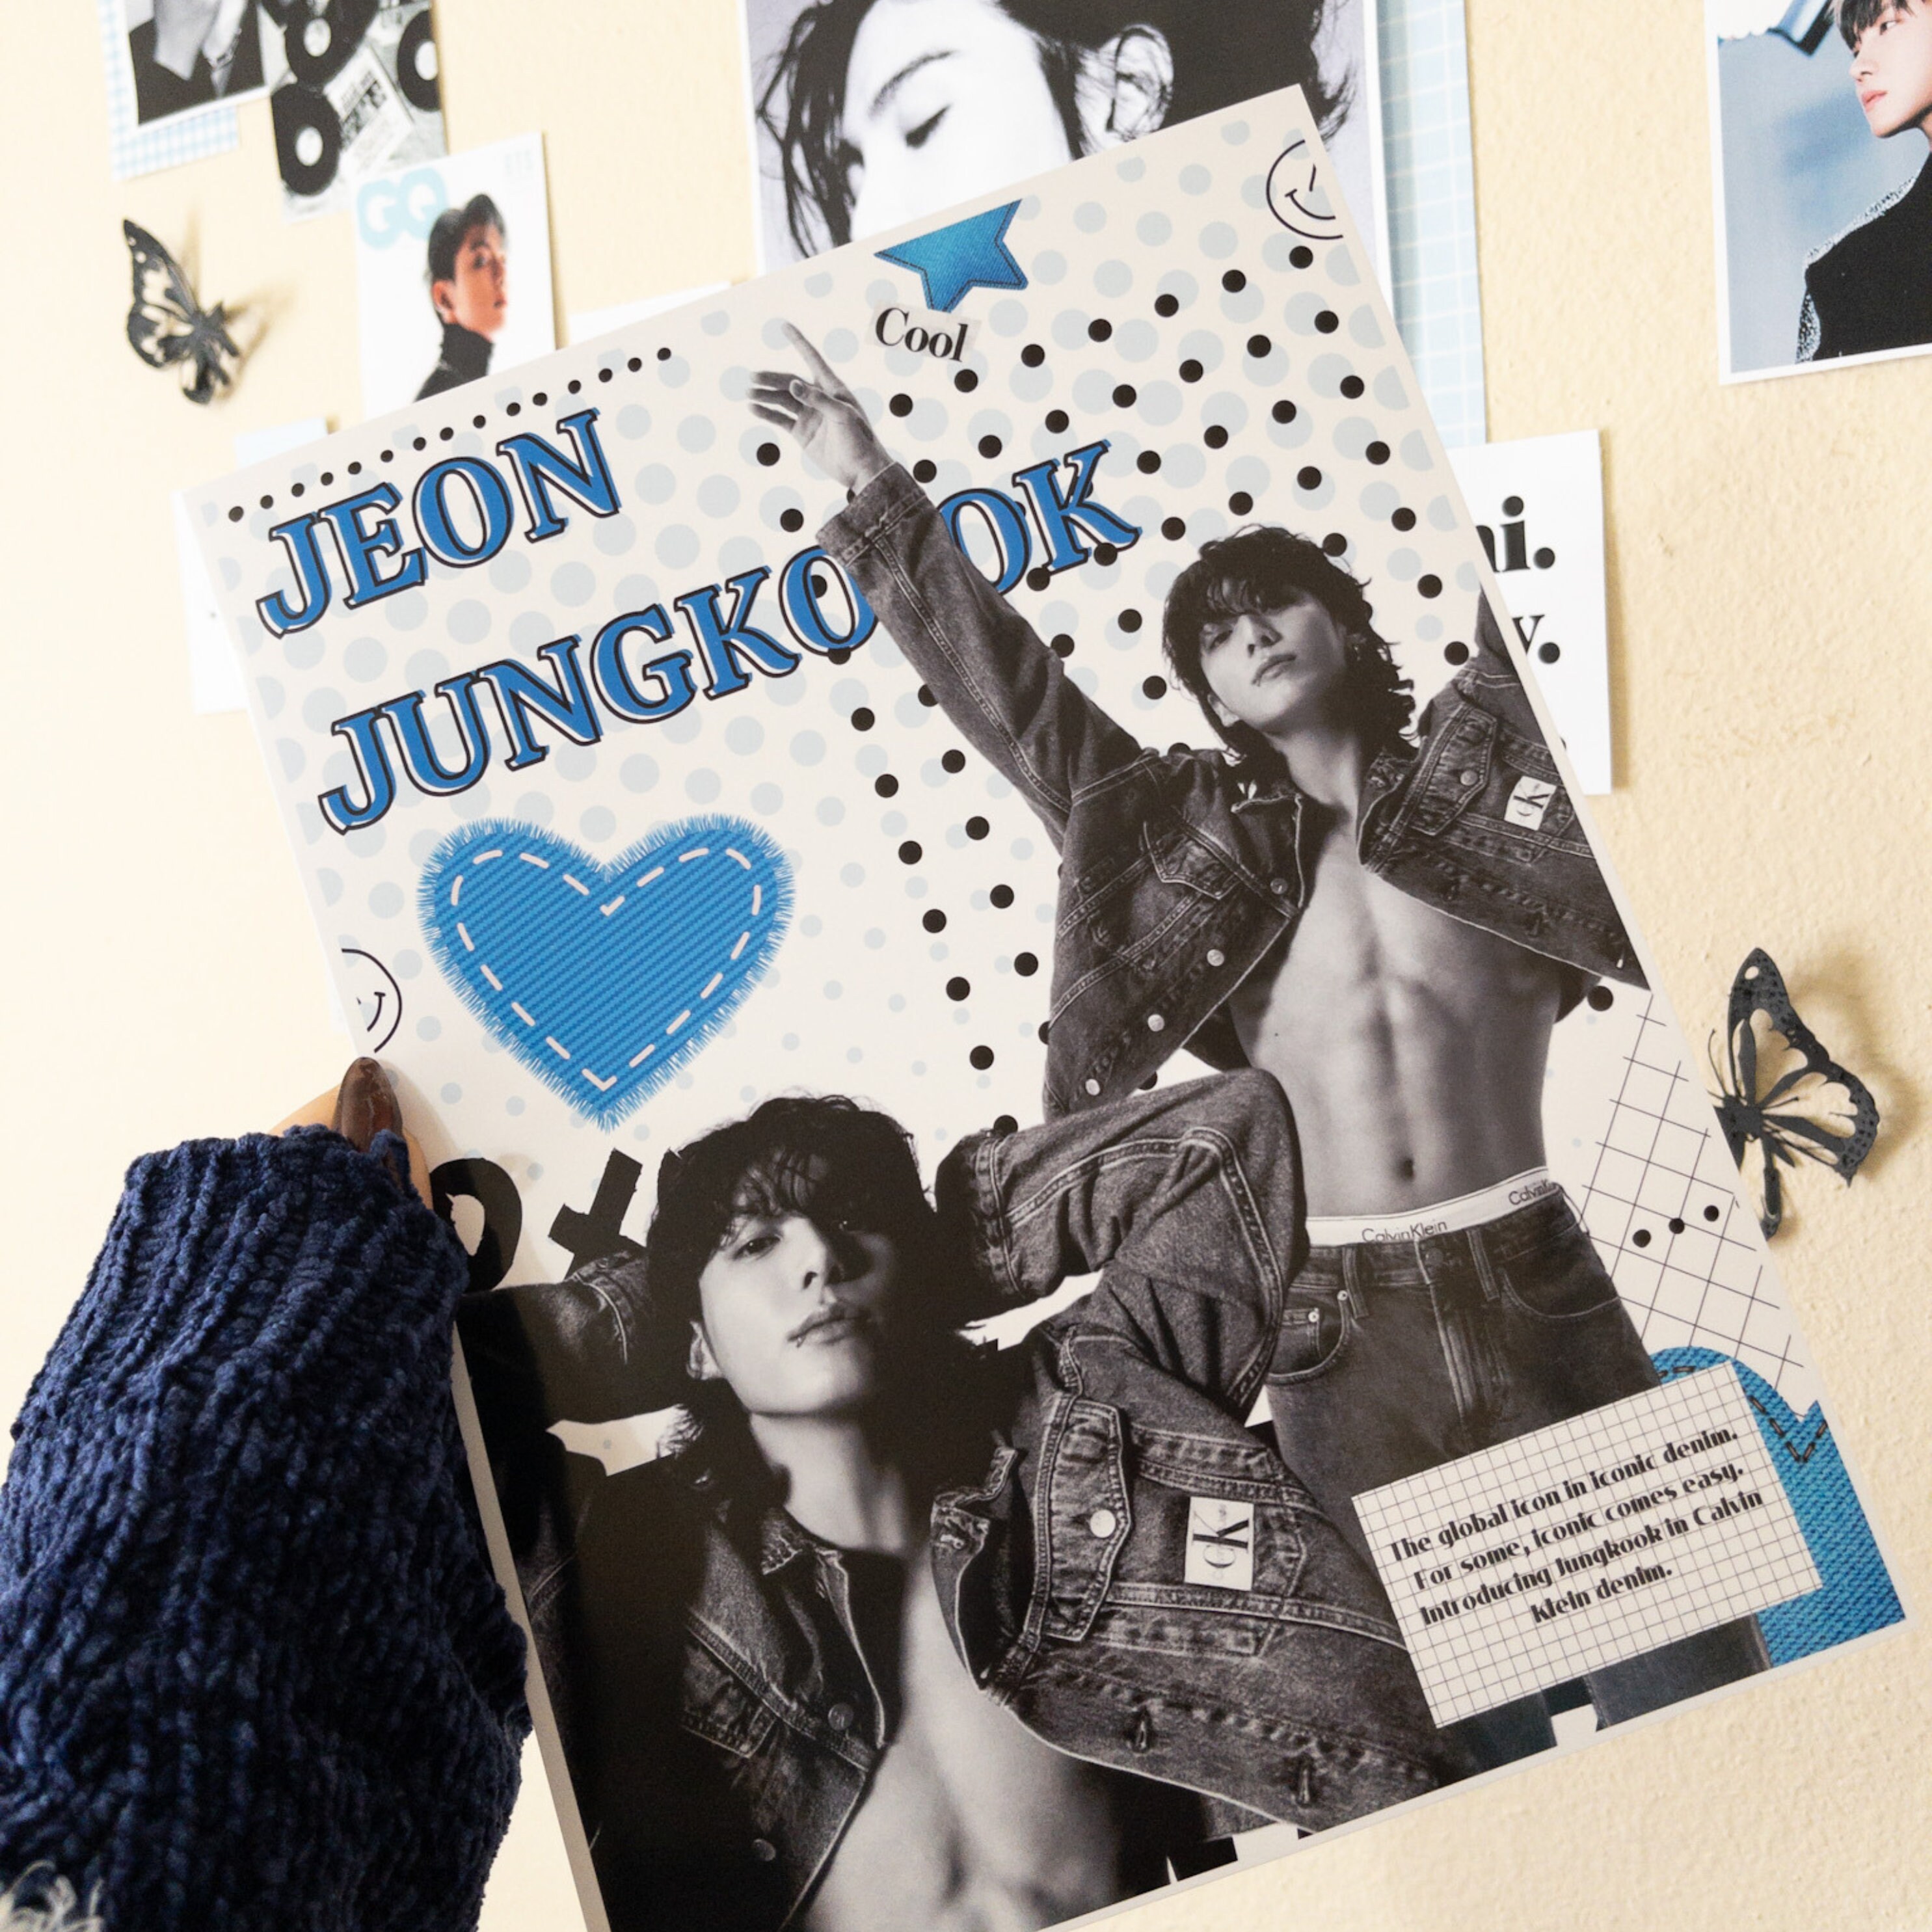 Introducing Jung Kook. The global icon in iconic denim. By